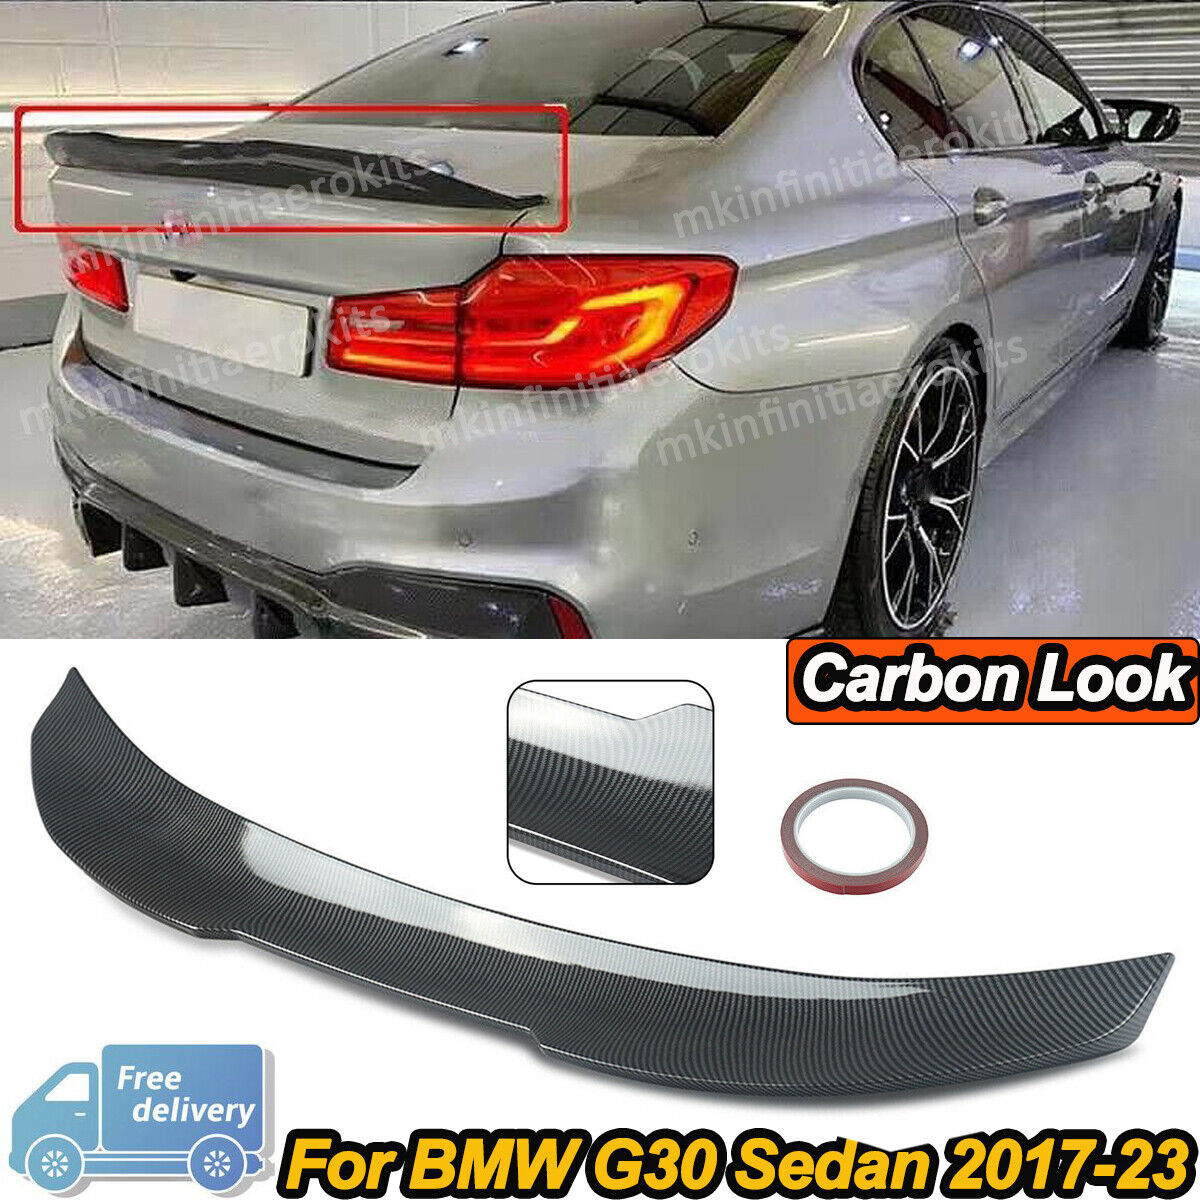 PSM Style Rear Trunk Spoiler Carbon Fiber Look Fit For BMW G30 F90 M5 2017-23